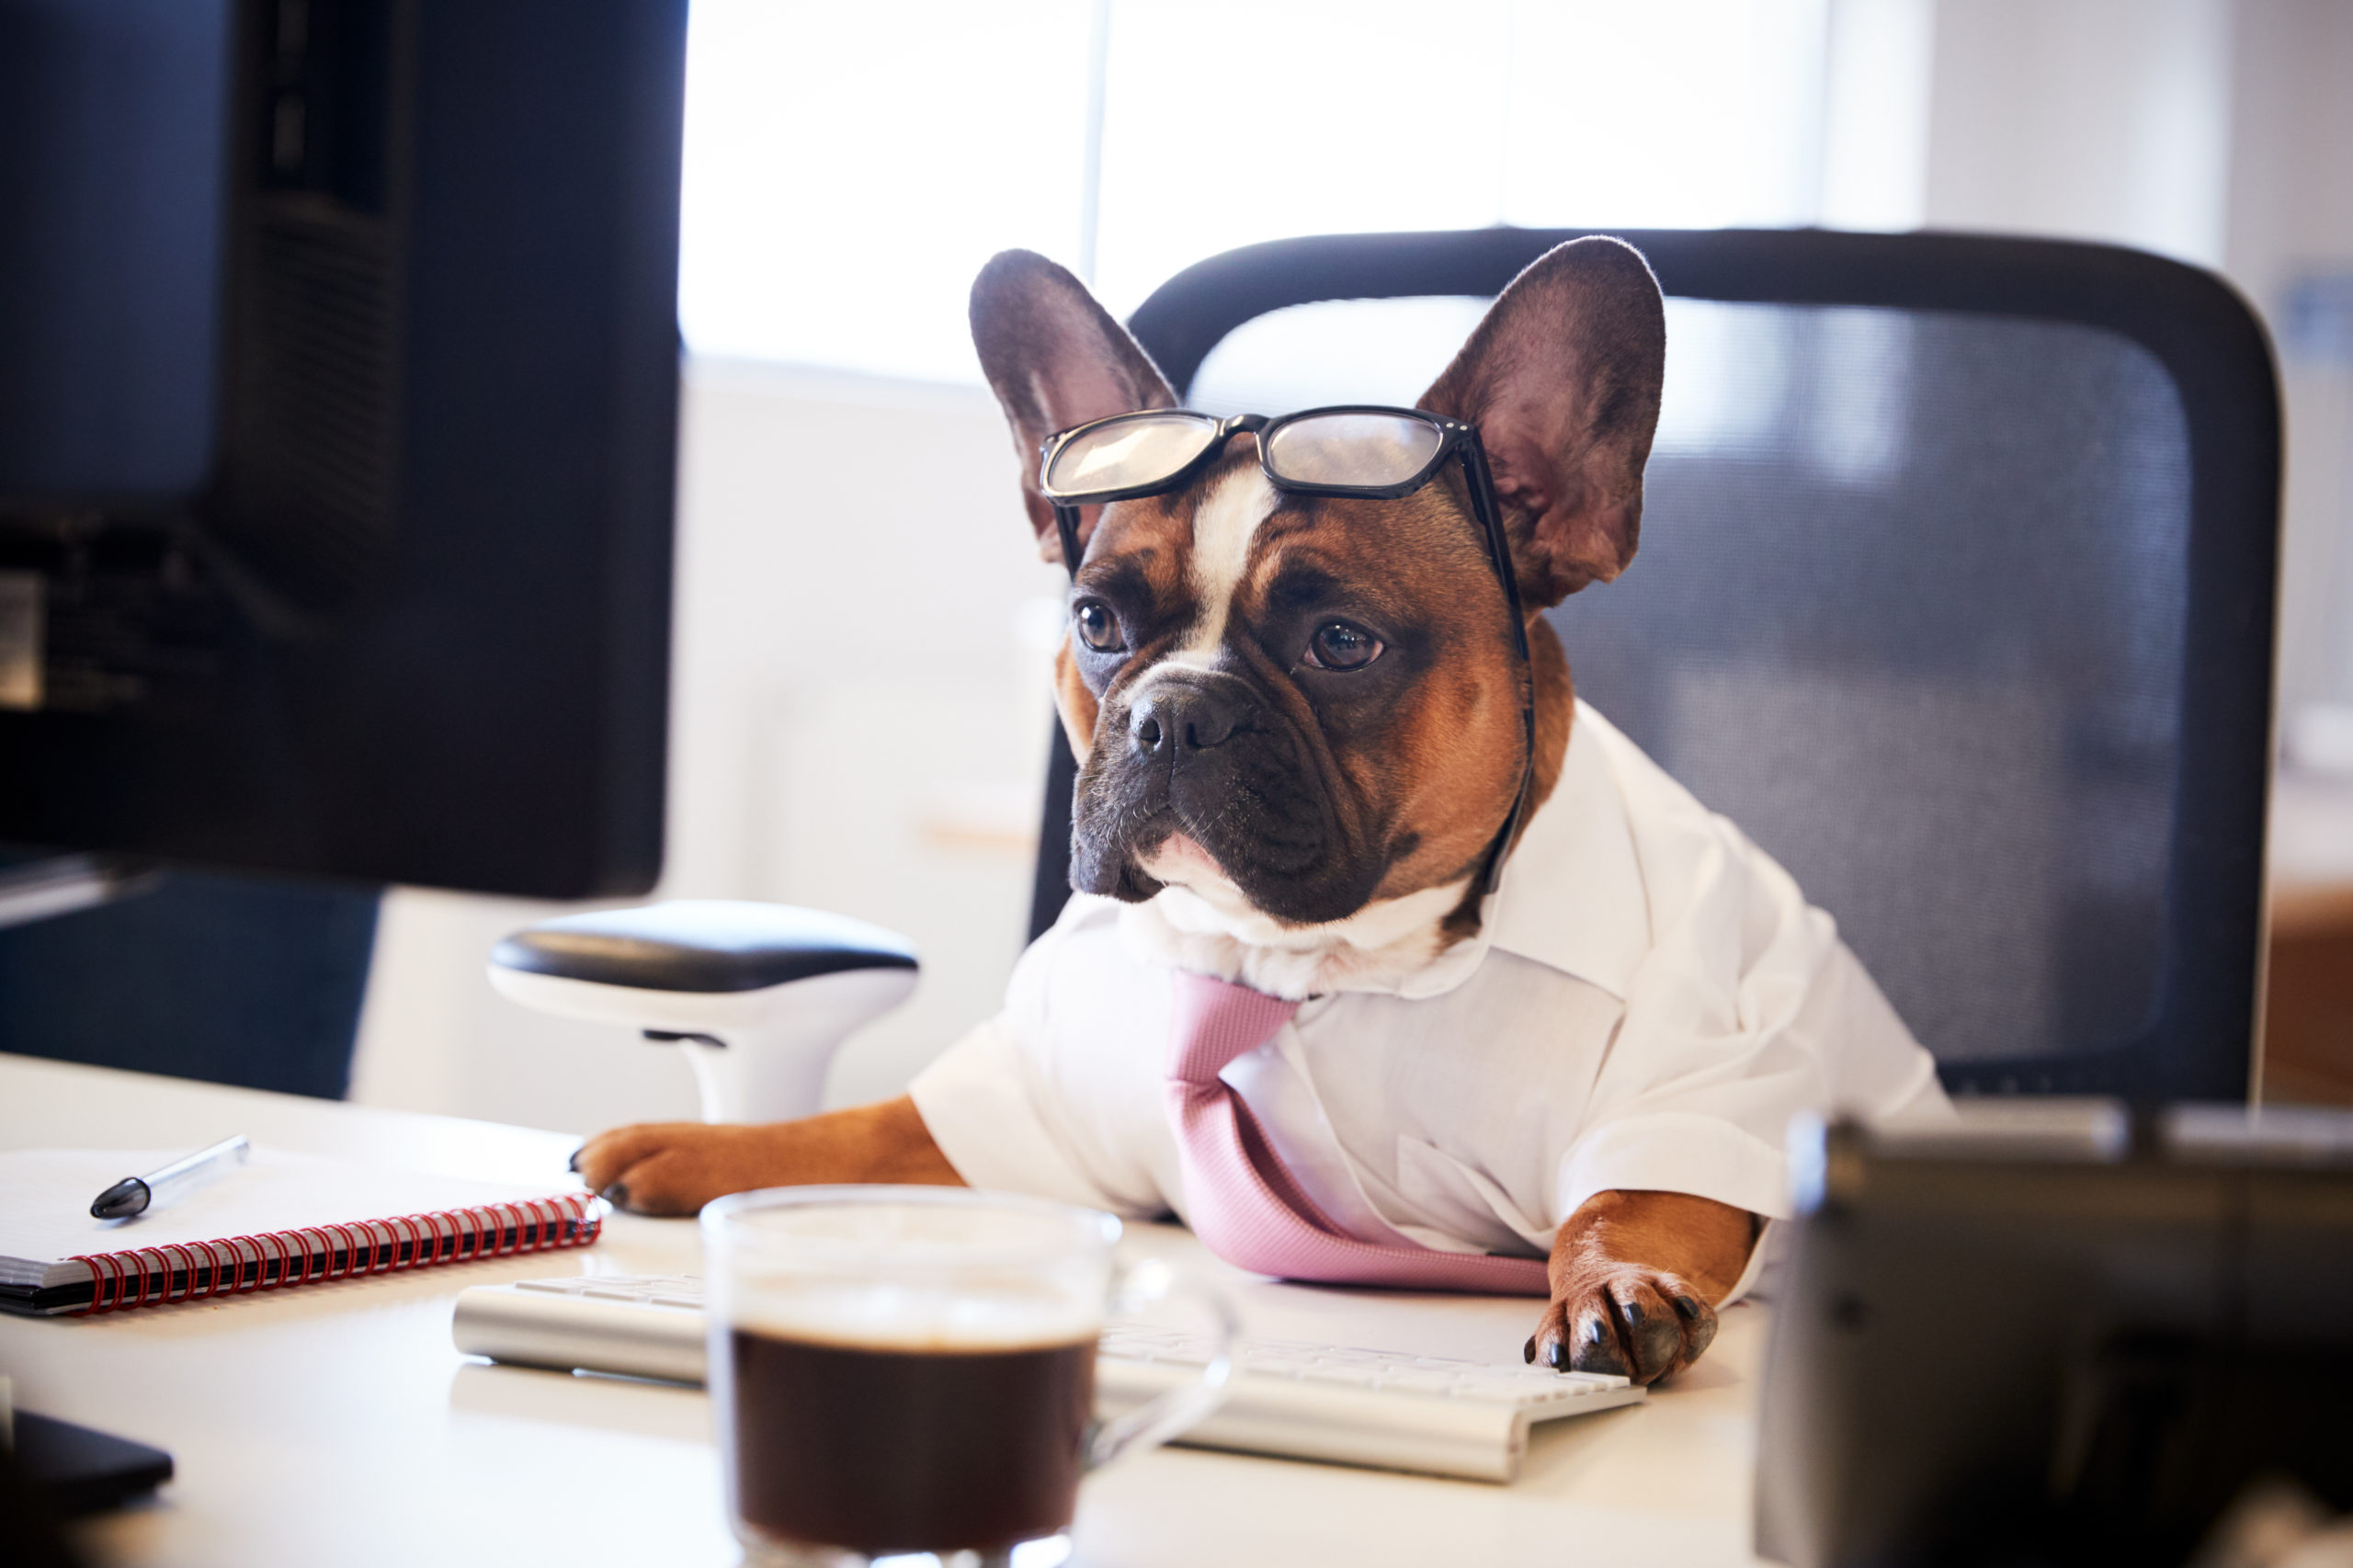 French,Bulldog,Dressed,As,Businessman,Works,At,Desk,On,Computer